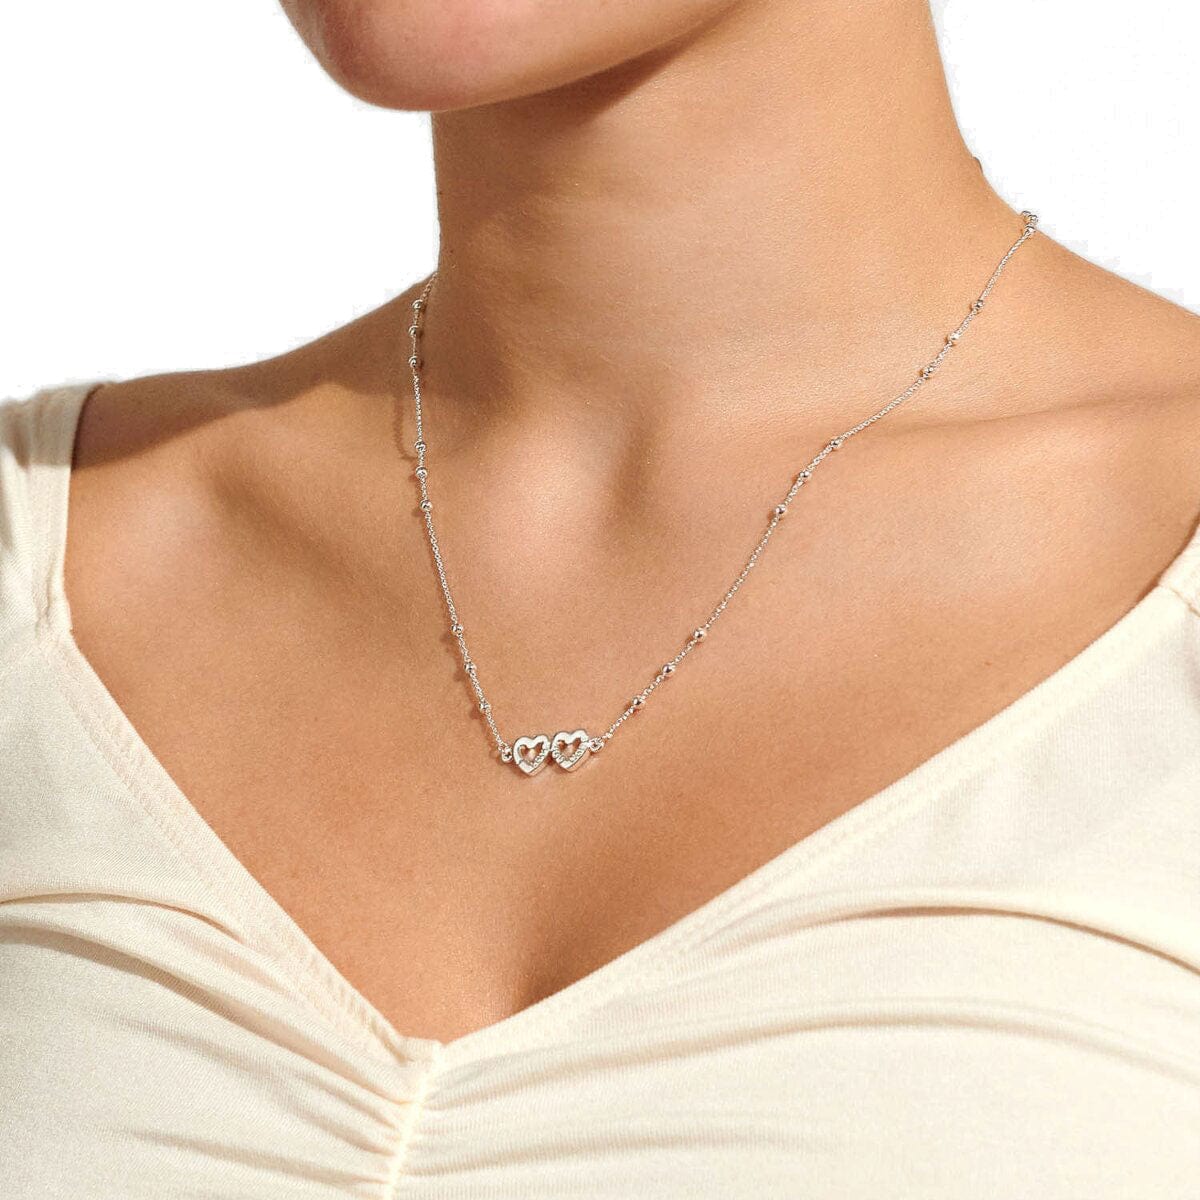 Joma Jewellery Necklace Joma Jewellery Necklace - A little Every Day I Love You More